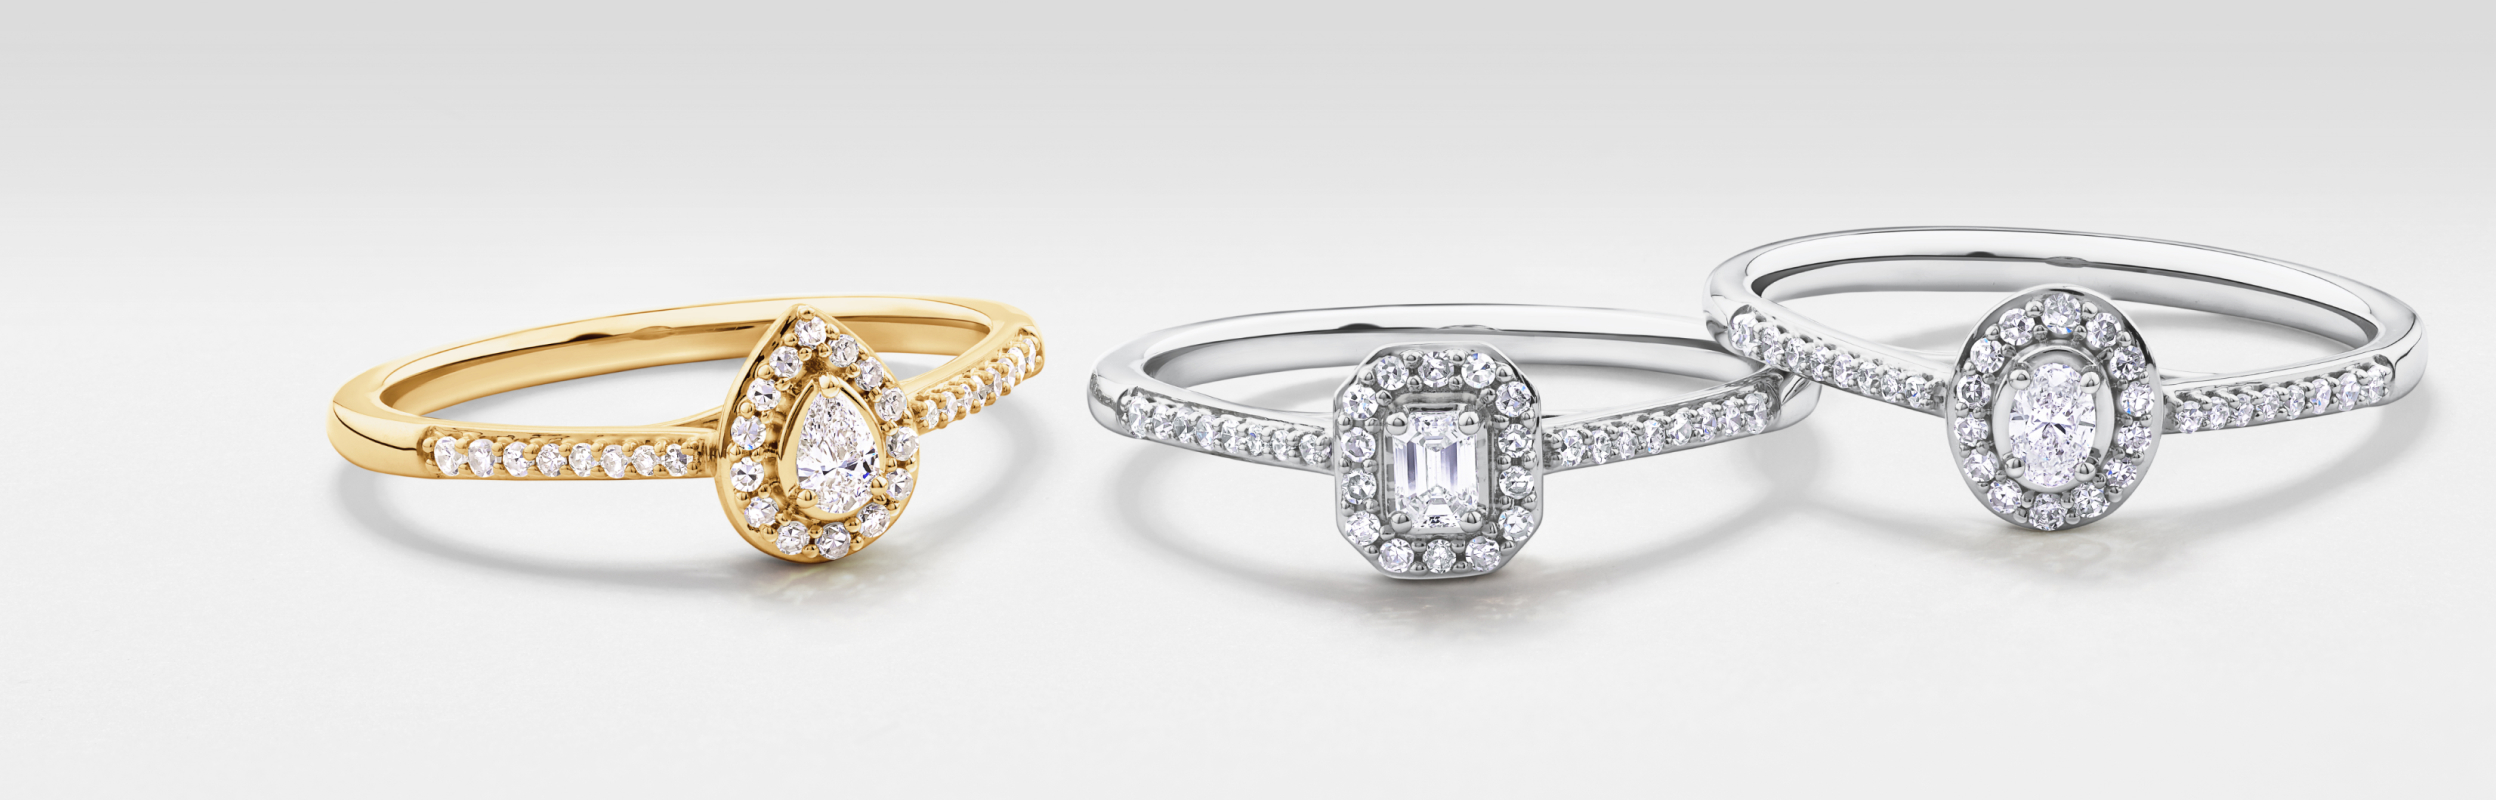 three diamond promise rings, one yellow gold and two white gold